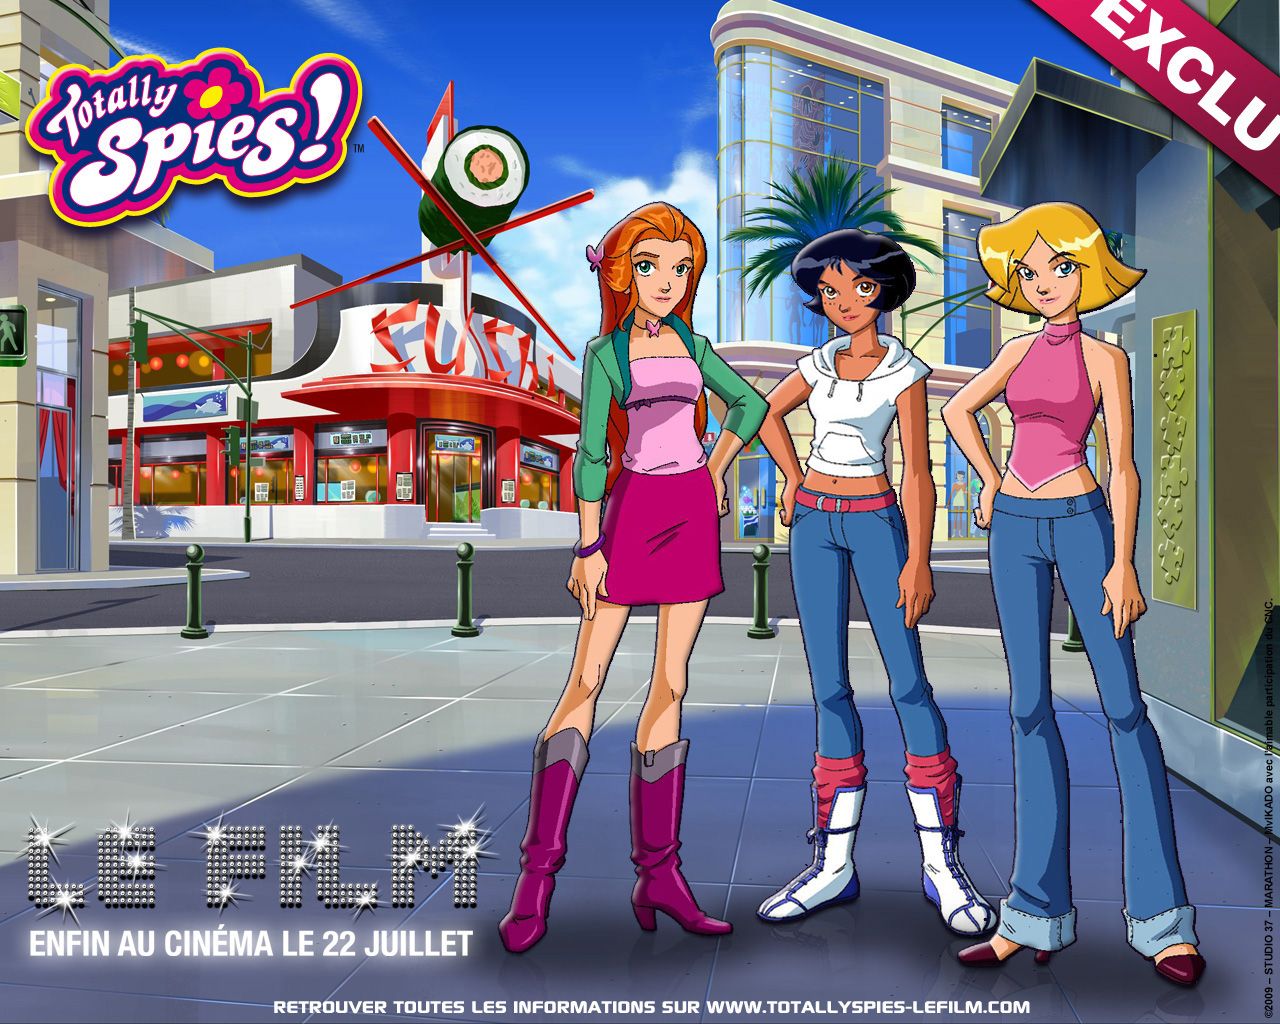 Wallpapers Totally Spies Cartoons Image Download